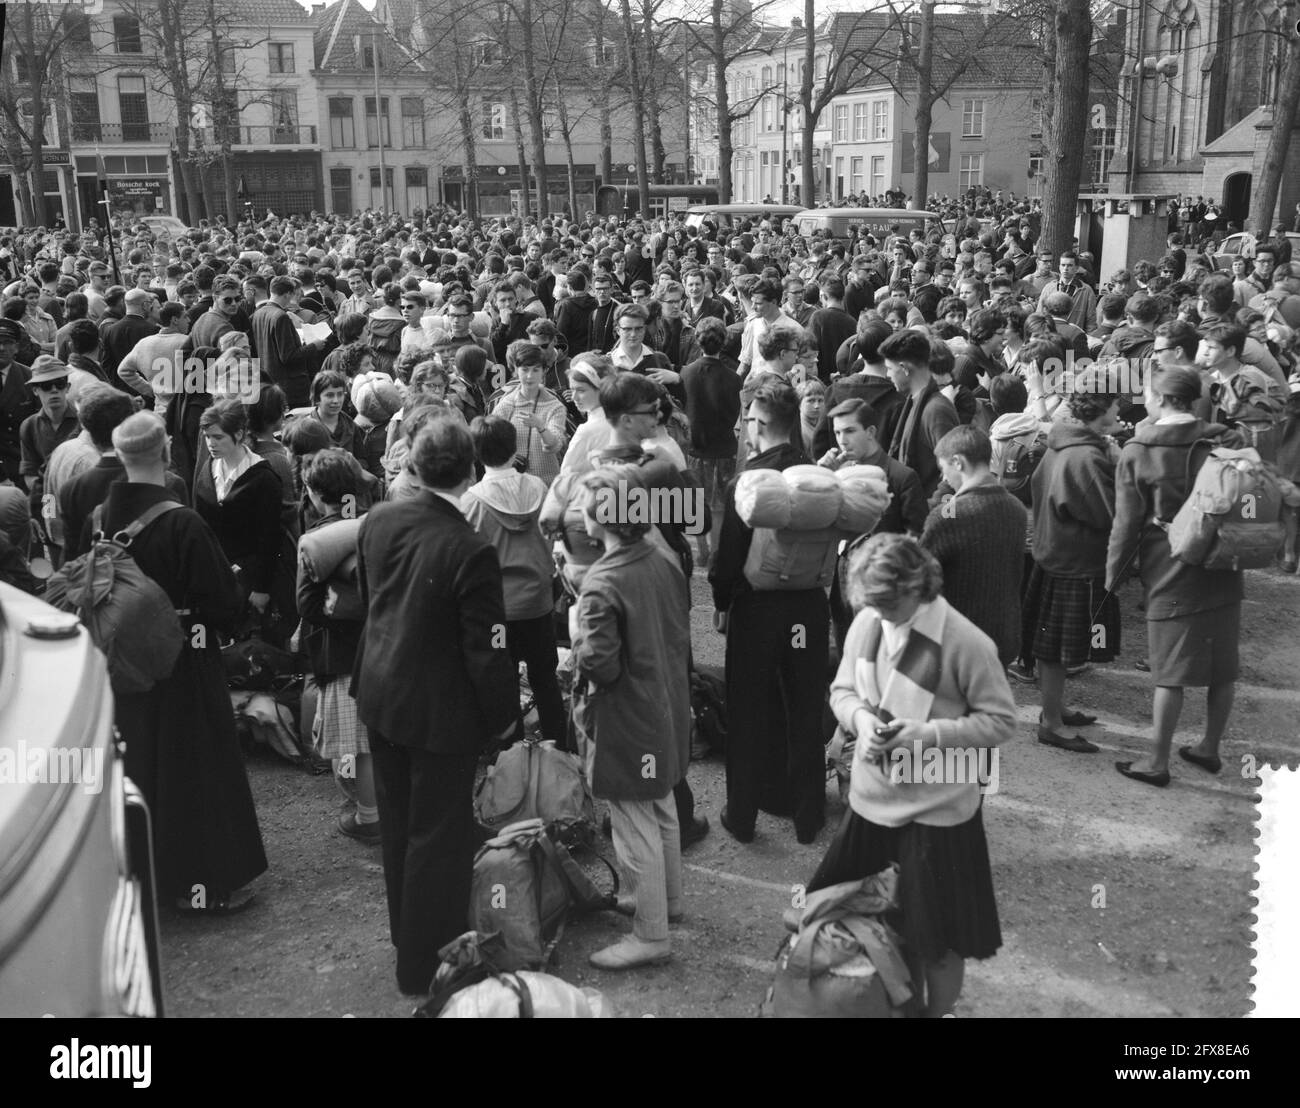 Beginning of the foot march Pax Christi at Den Bosch . Gathering place at the parade of the 2500 participants, April 6, 1961, Foot marches, participants, parades, gathering places, The Netherlands, 20th century press agency photo, news to remember, documentary, historic photography 1945-1990, visual stories, human history of the Twentieth Century, capturing moments in time Stock Photo